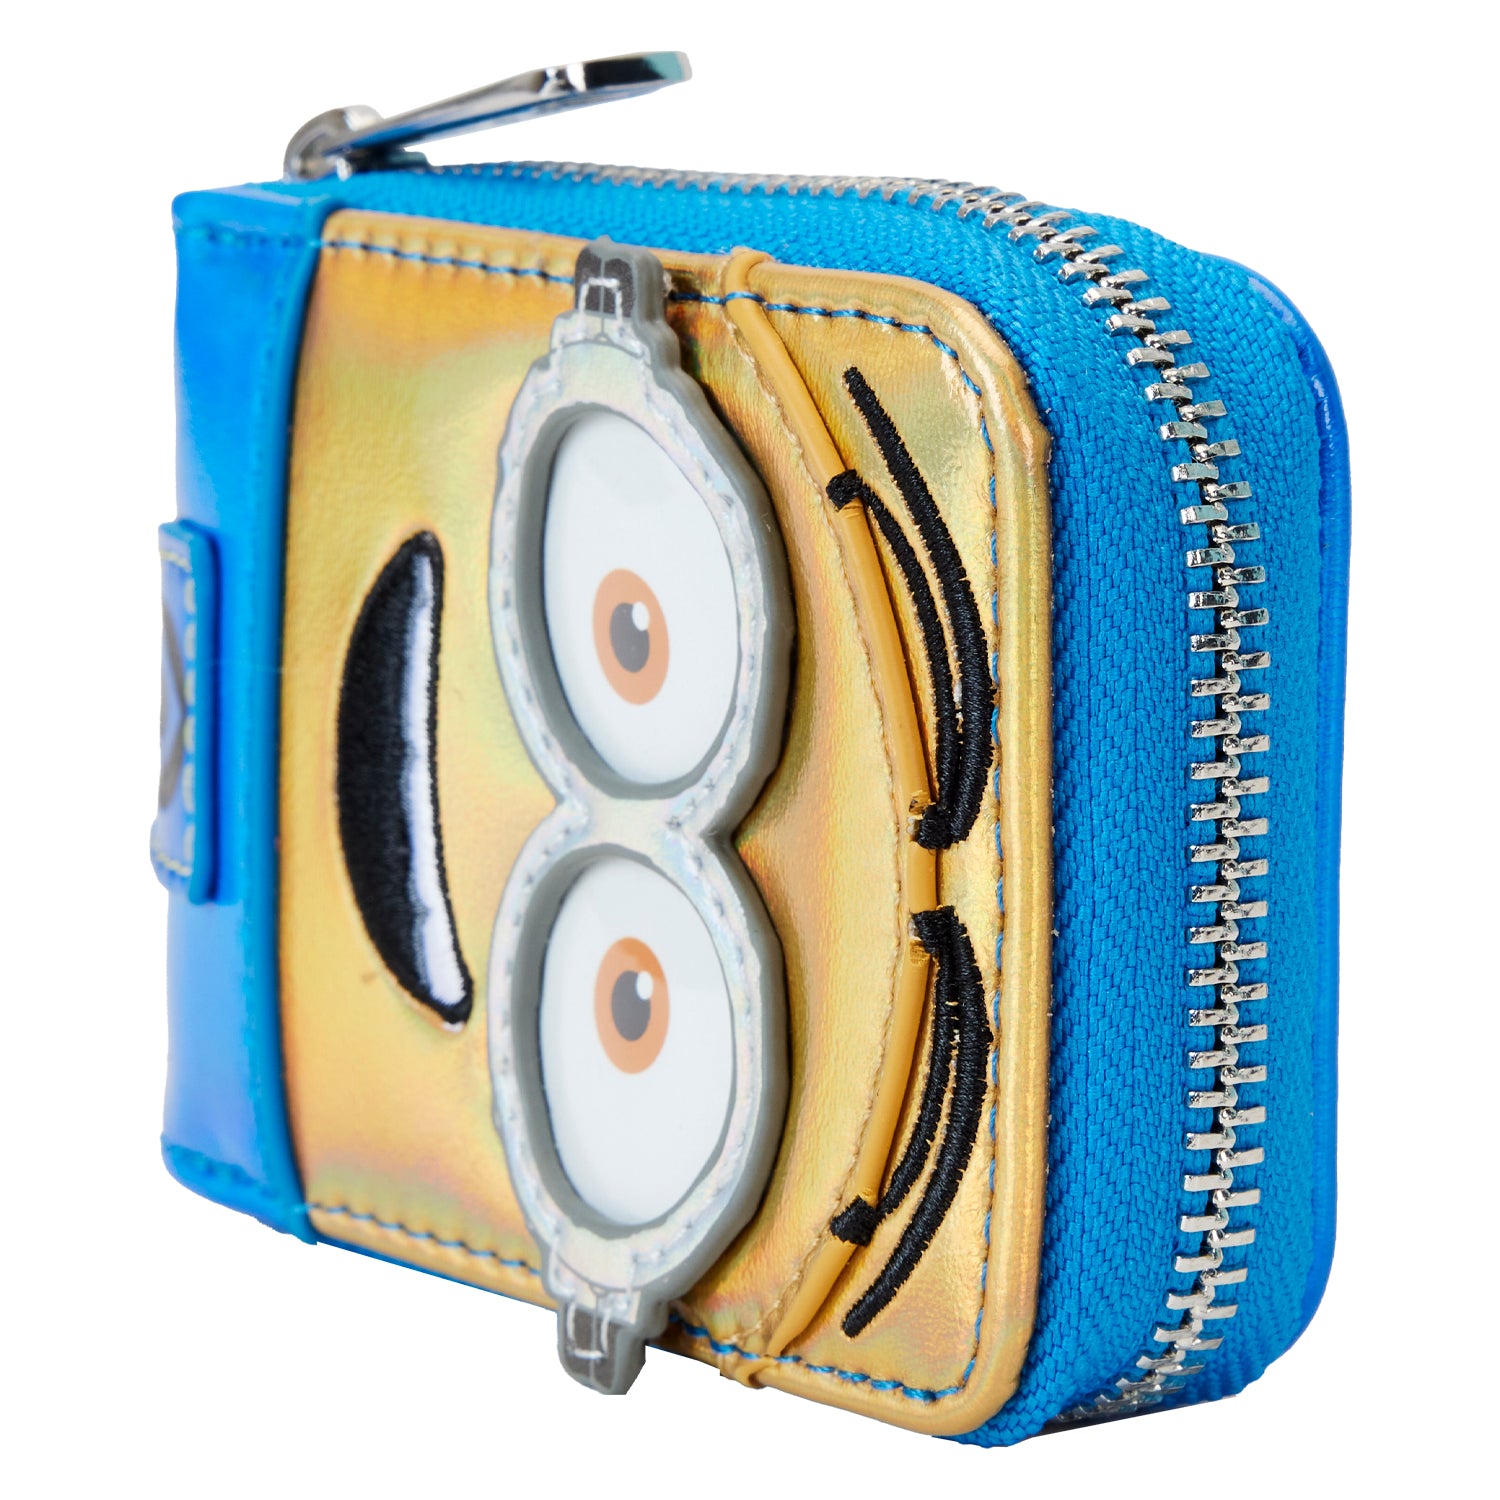 Loungefly Despicable Me Minion Accordion Wallet